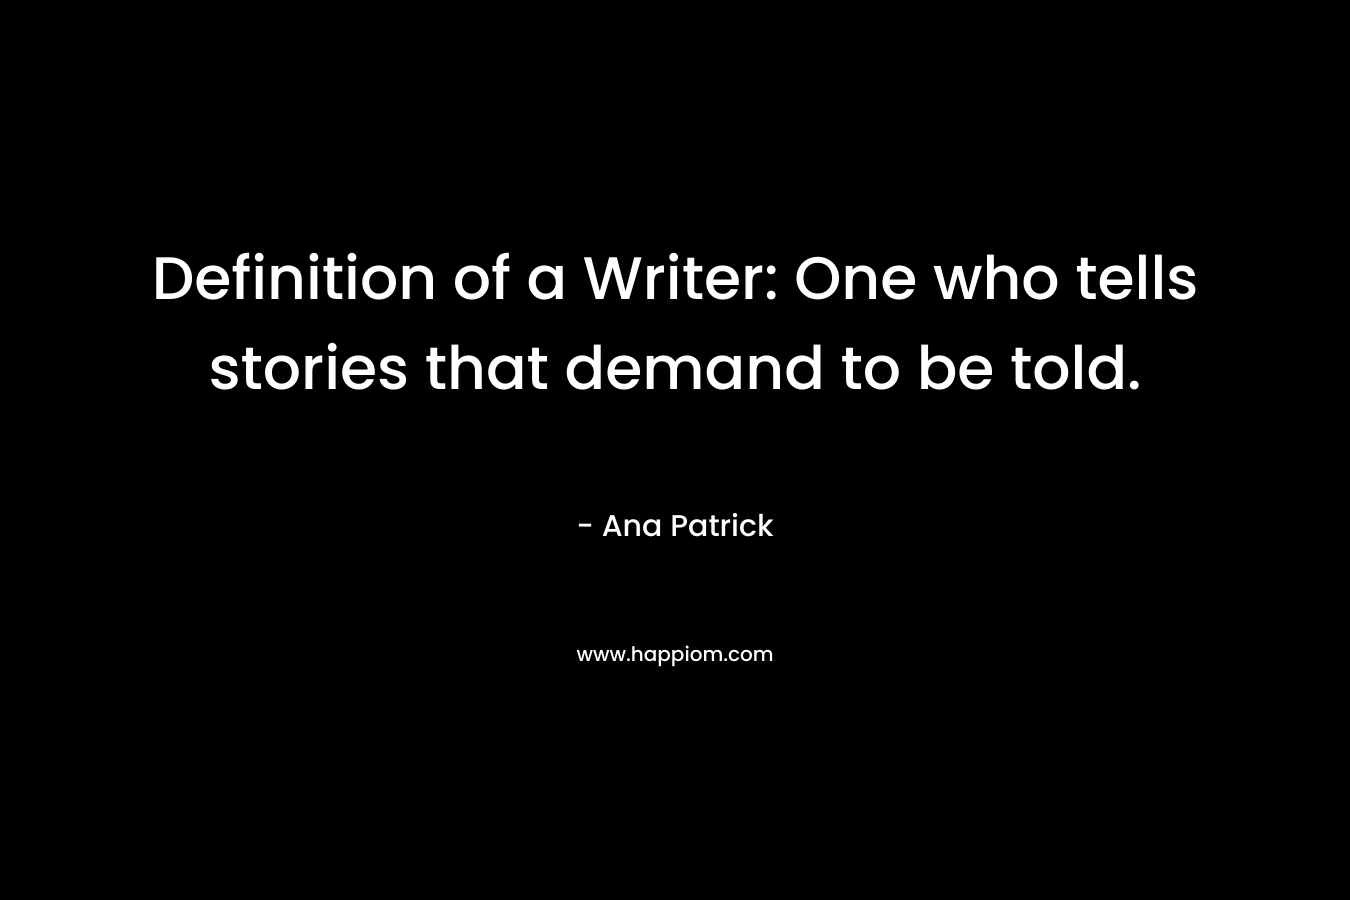 Definition of a Writer: One who tells stories that demand to be told. – Ana Patrick